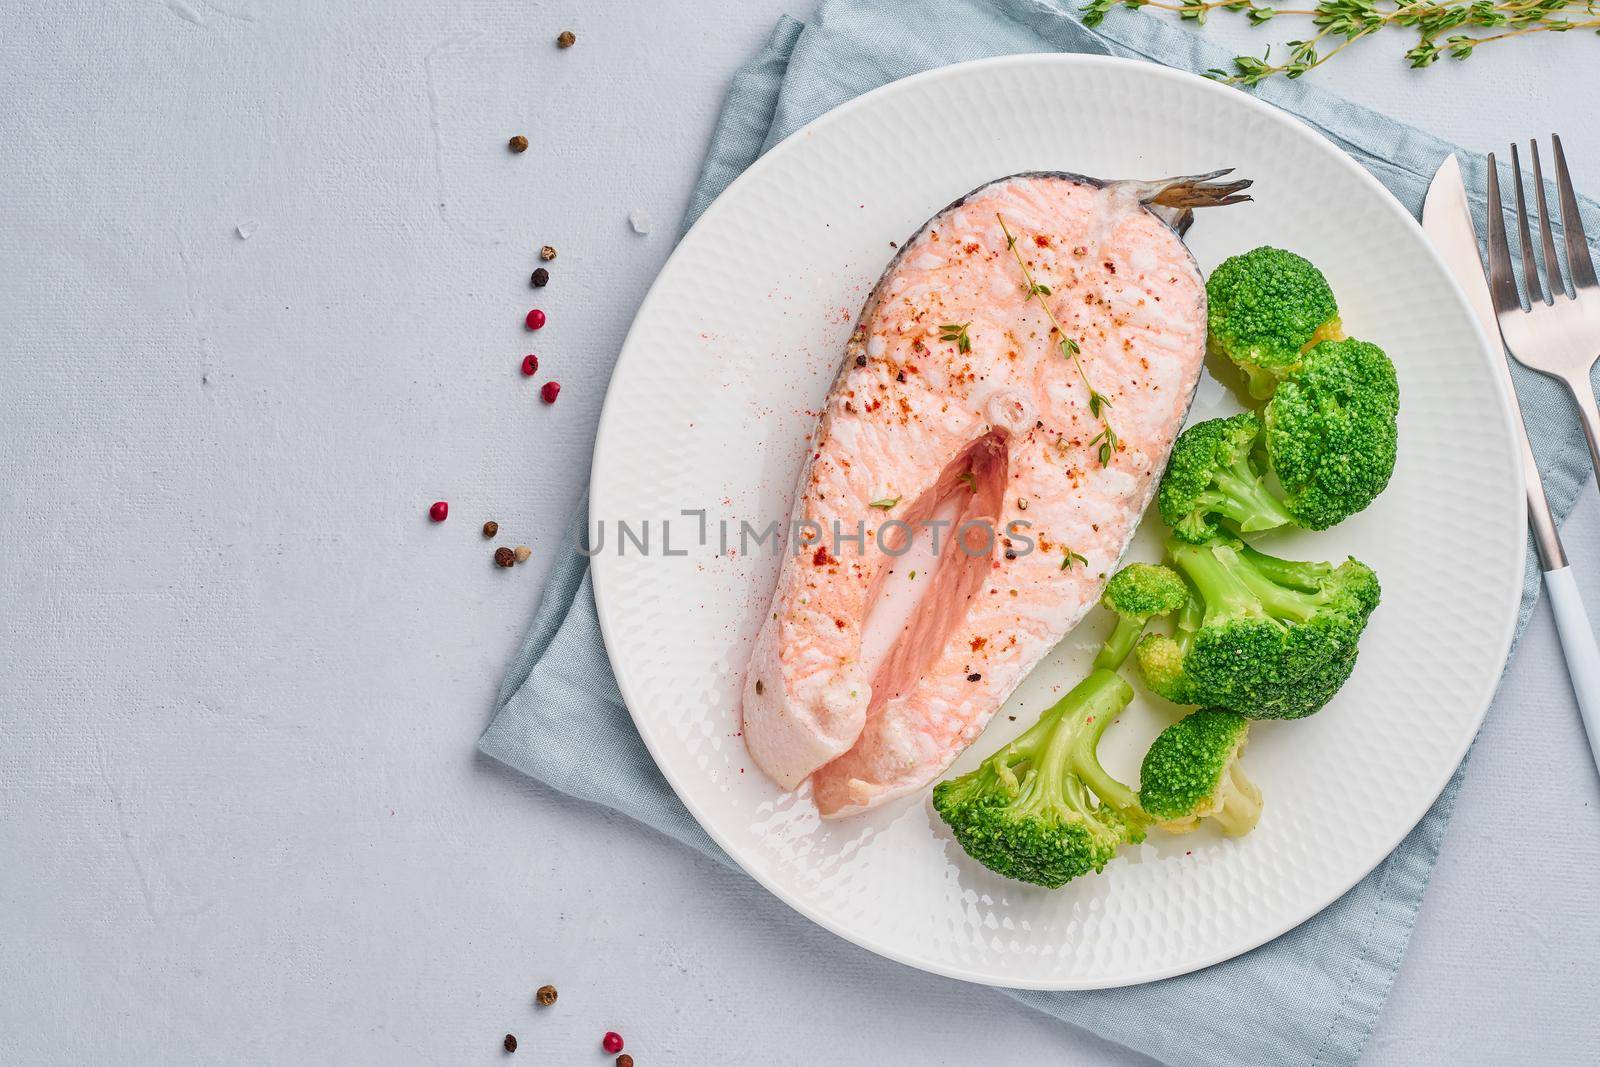 Steam salmon, broccoli, paleo, keto or fodmap diet. White plate on a blue table, top view, copy space